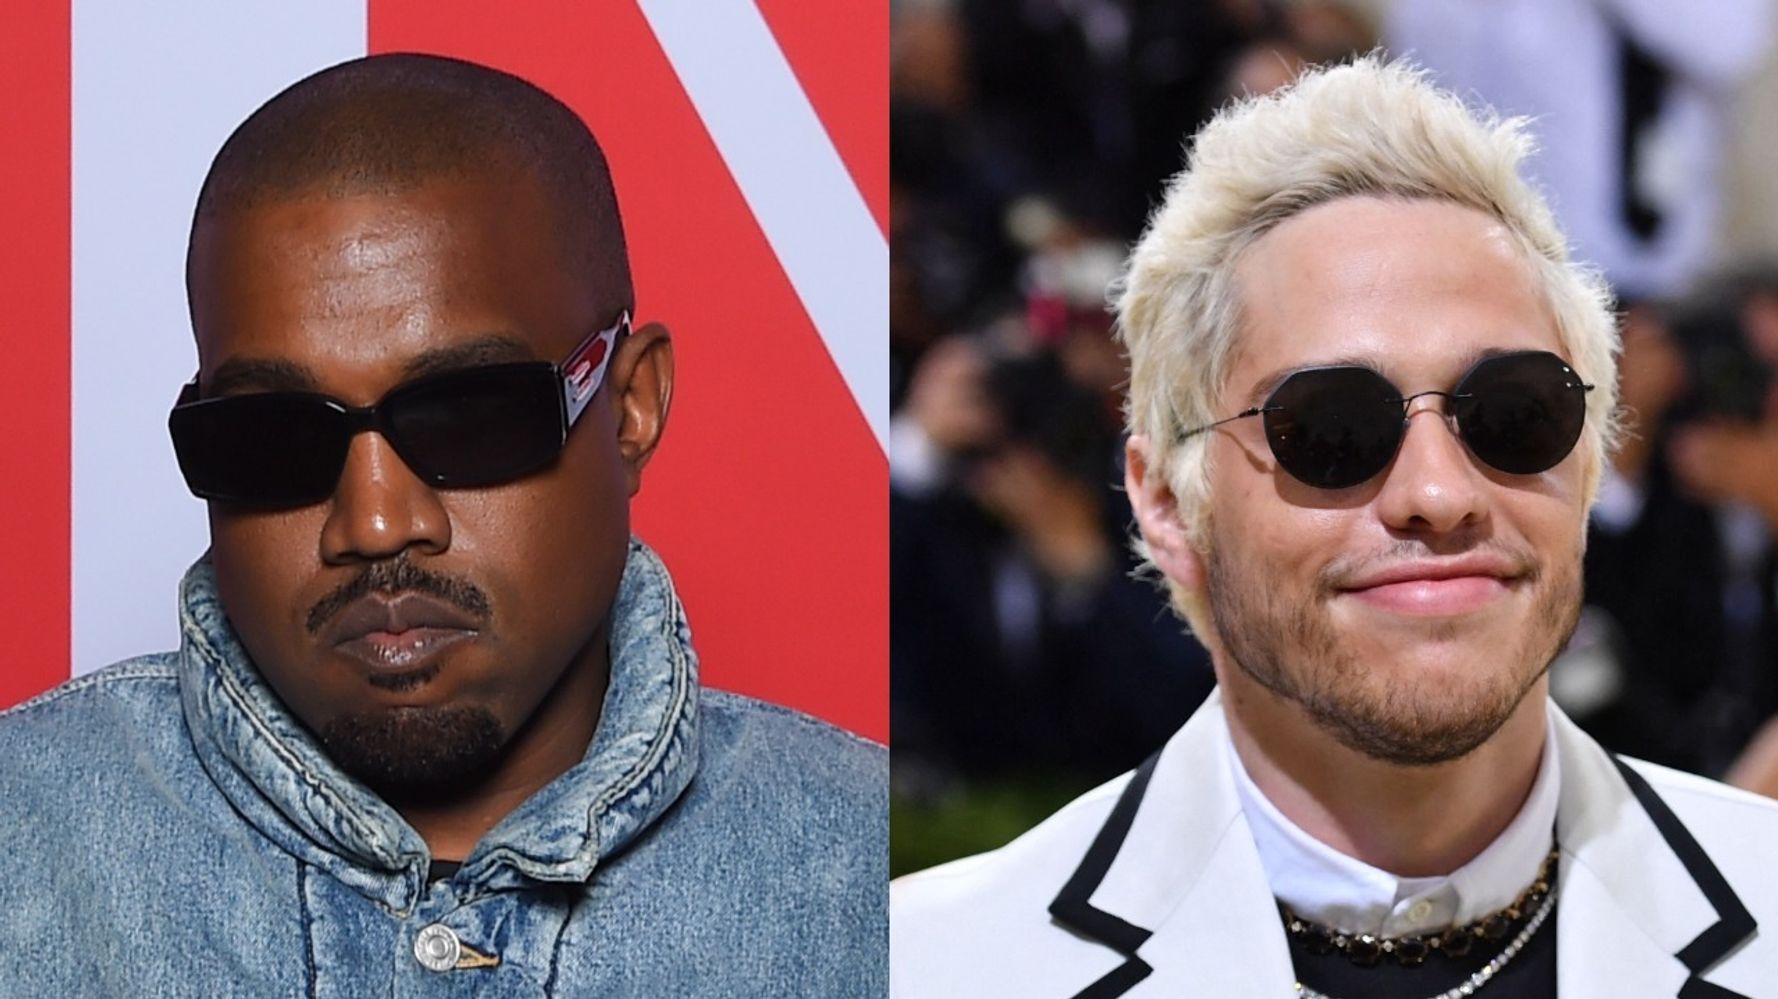 Pete Davidson Tells Kanye West To 'Grow The F**k Up' In Publicized Text Exchange